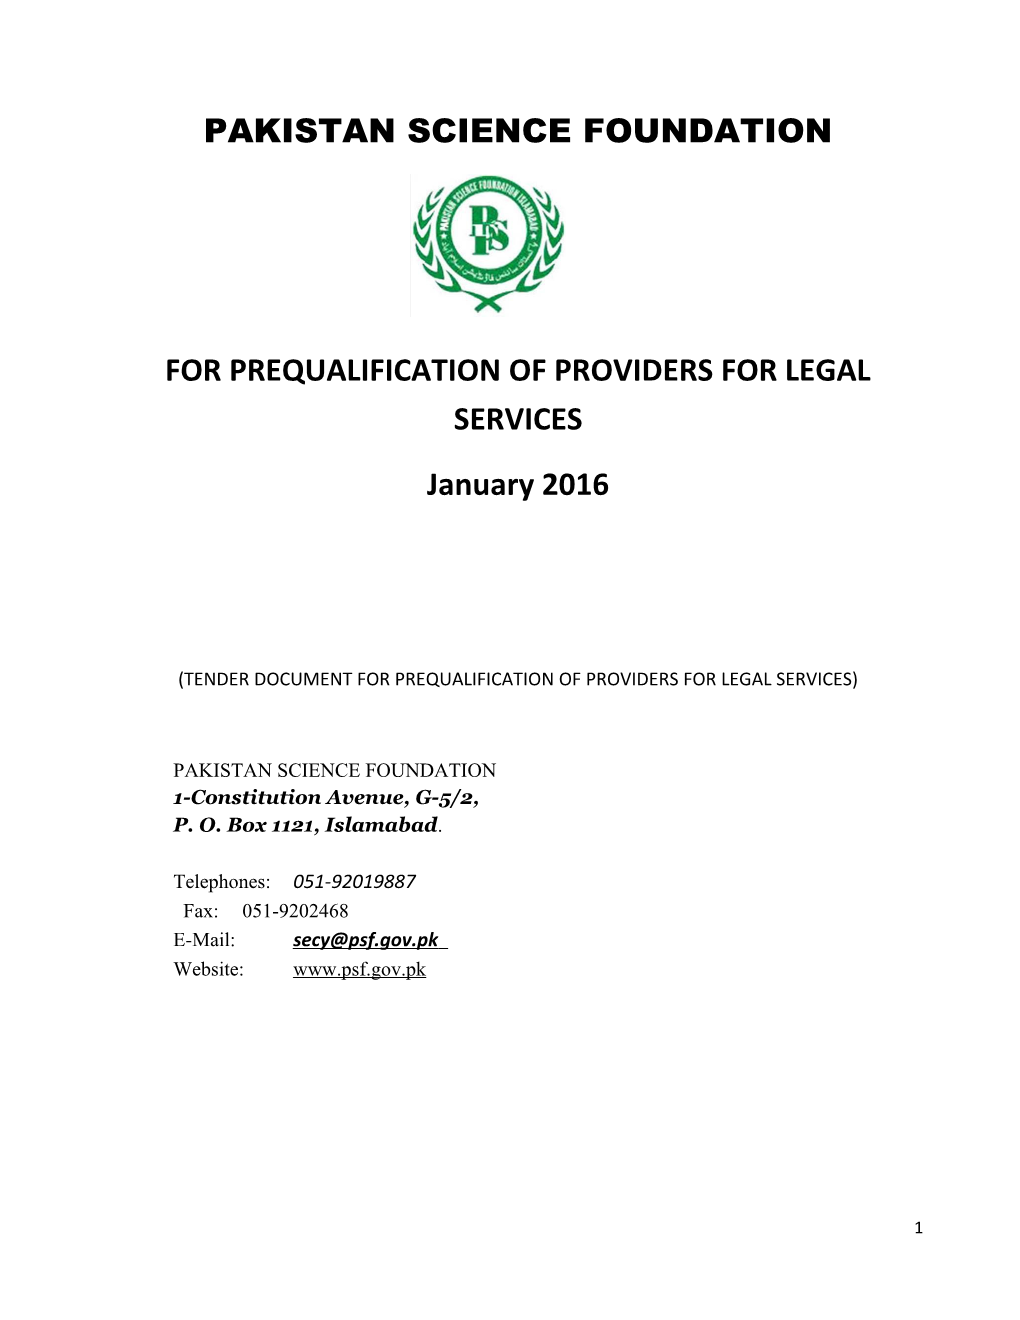 For Prequalification of Providers for Legal Services